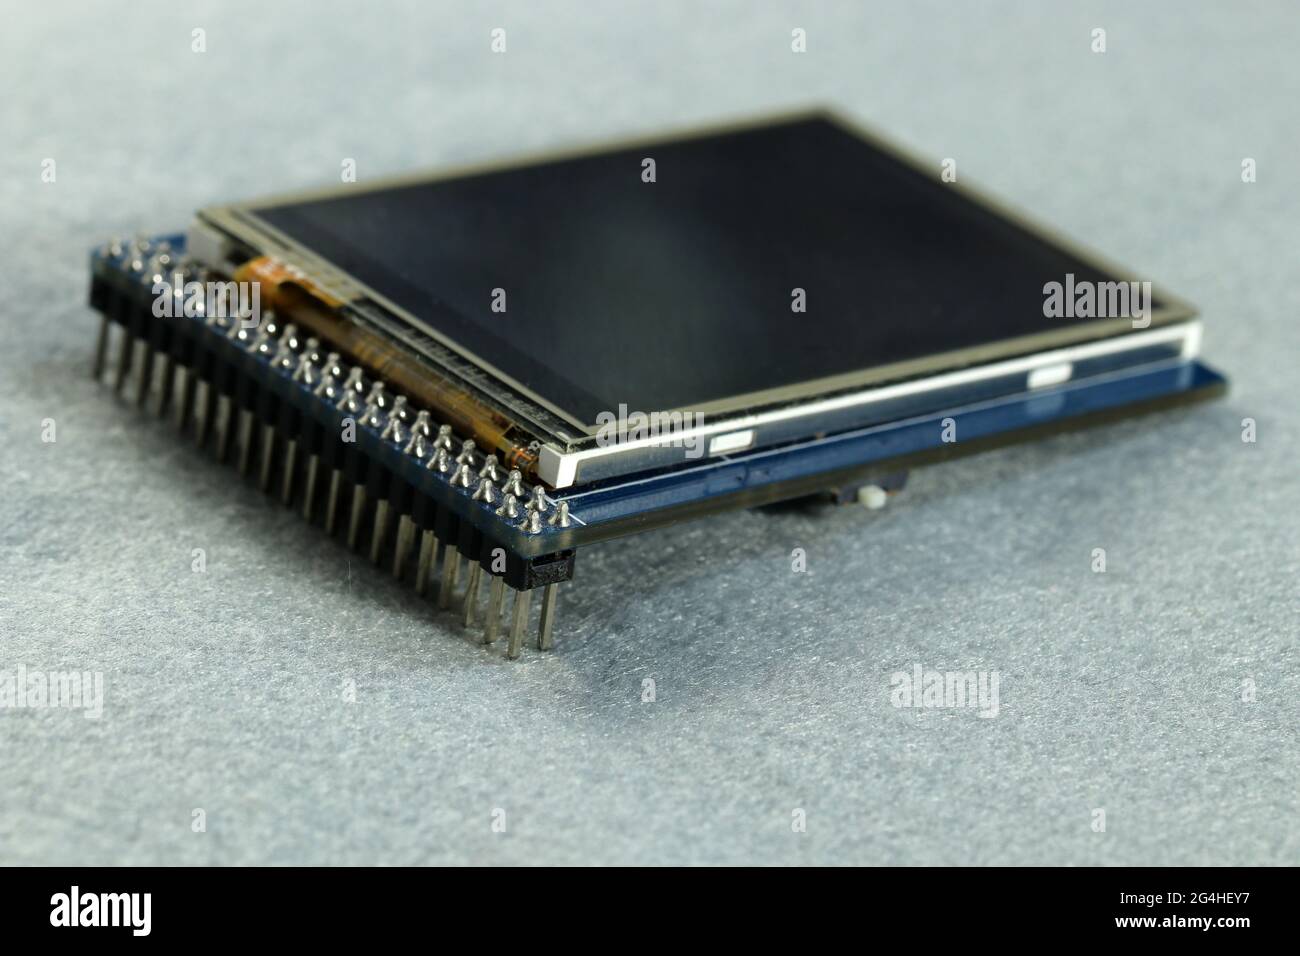 Electronic components. TFT display for embedding on electronic projects. Stock Photo